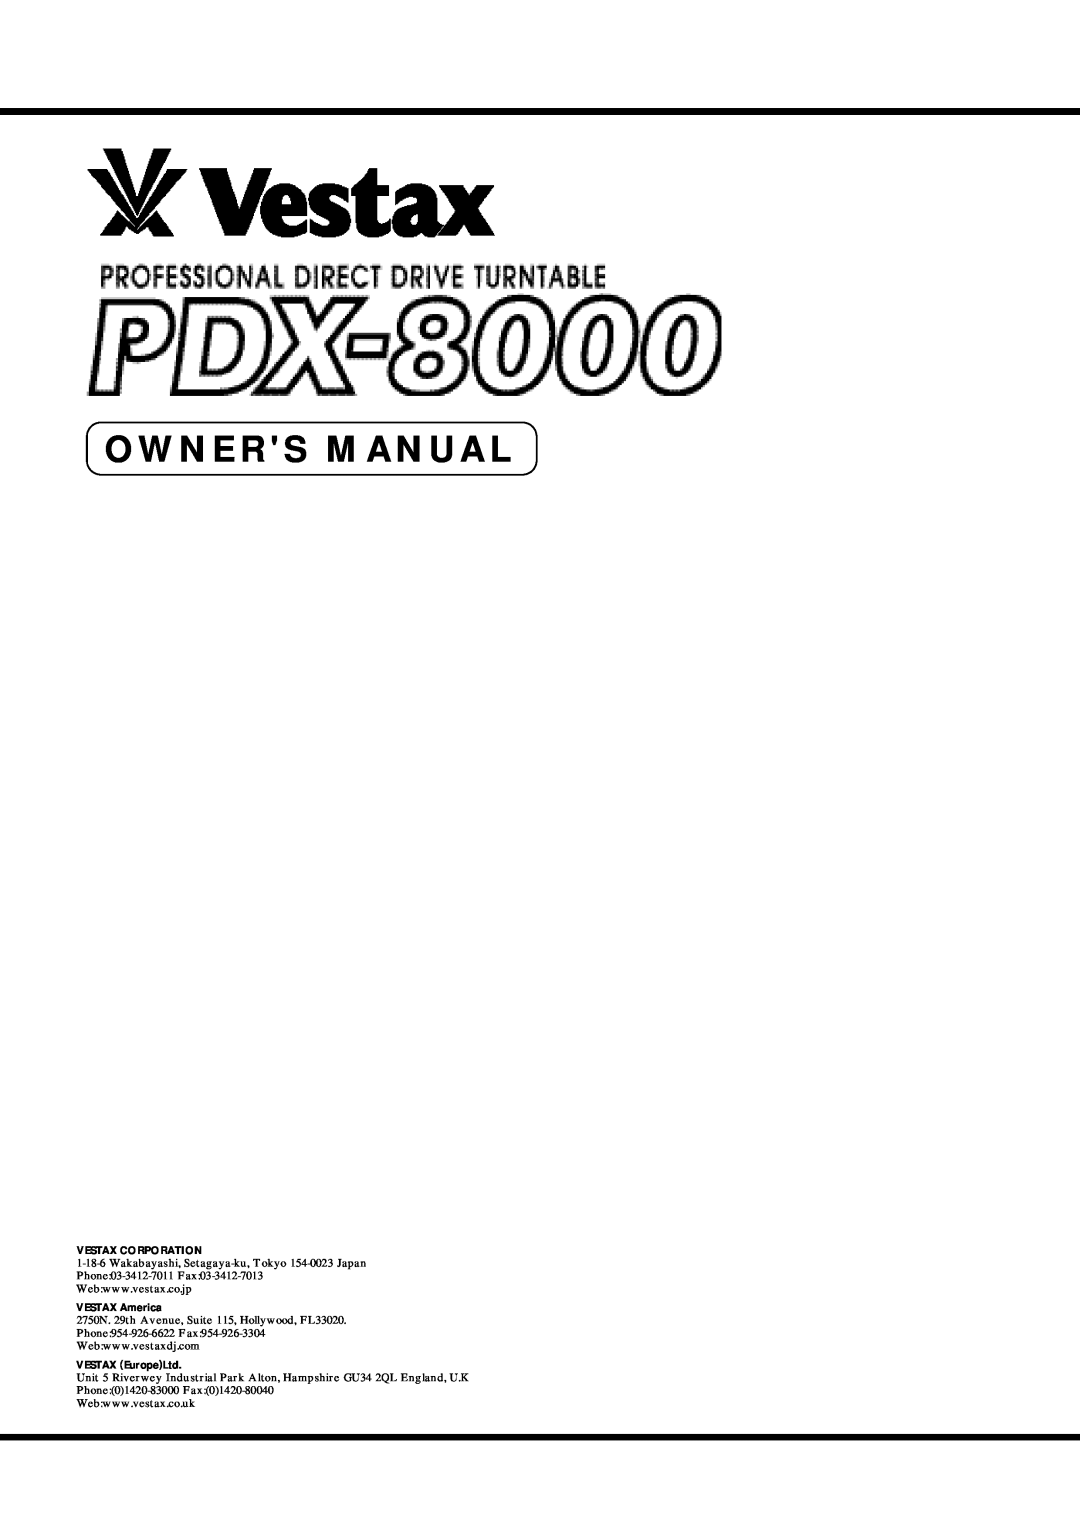 CK Electric Part PDX-8000 owner manual Owners Manual, Vestax Corporation, Phone 03-3412-7011 Fax, VESTAX America 